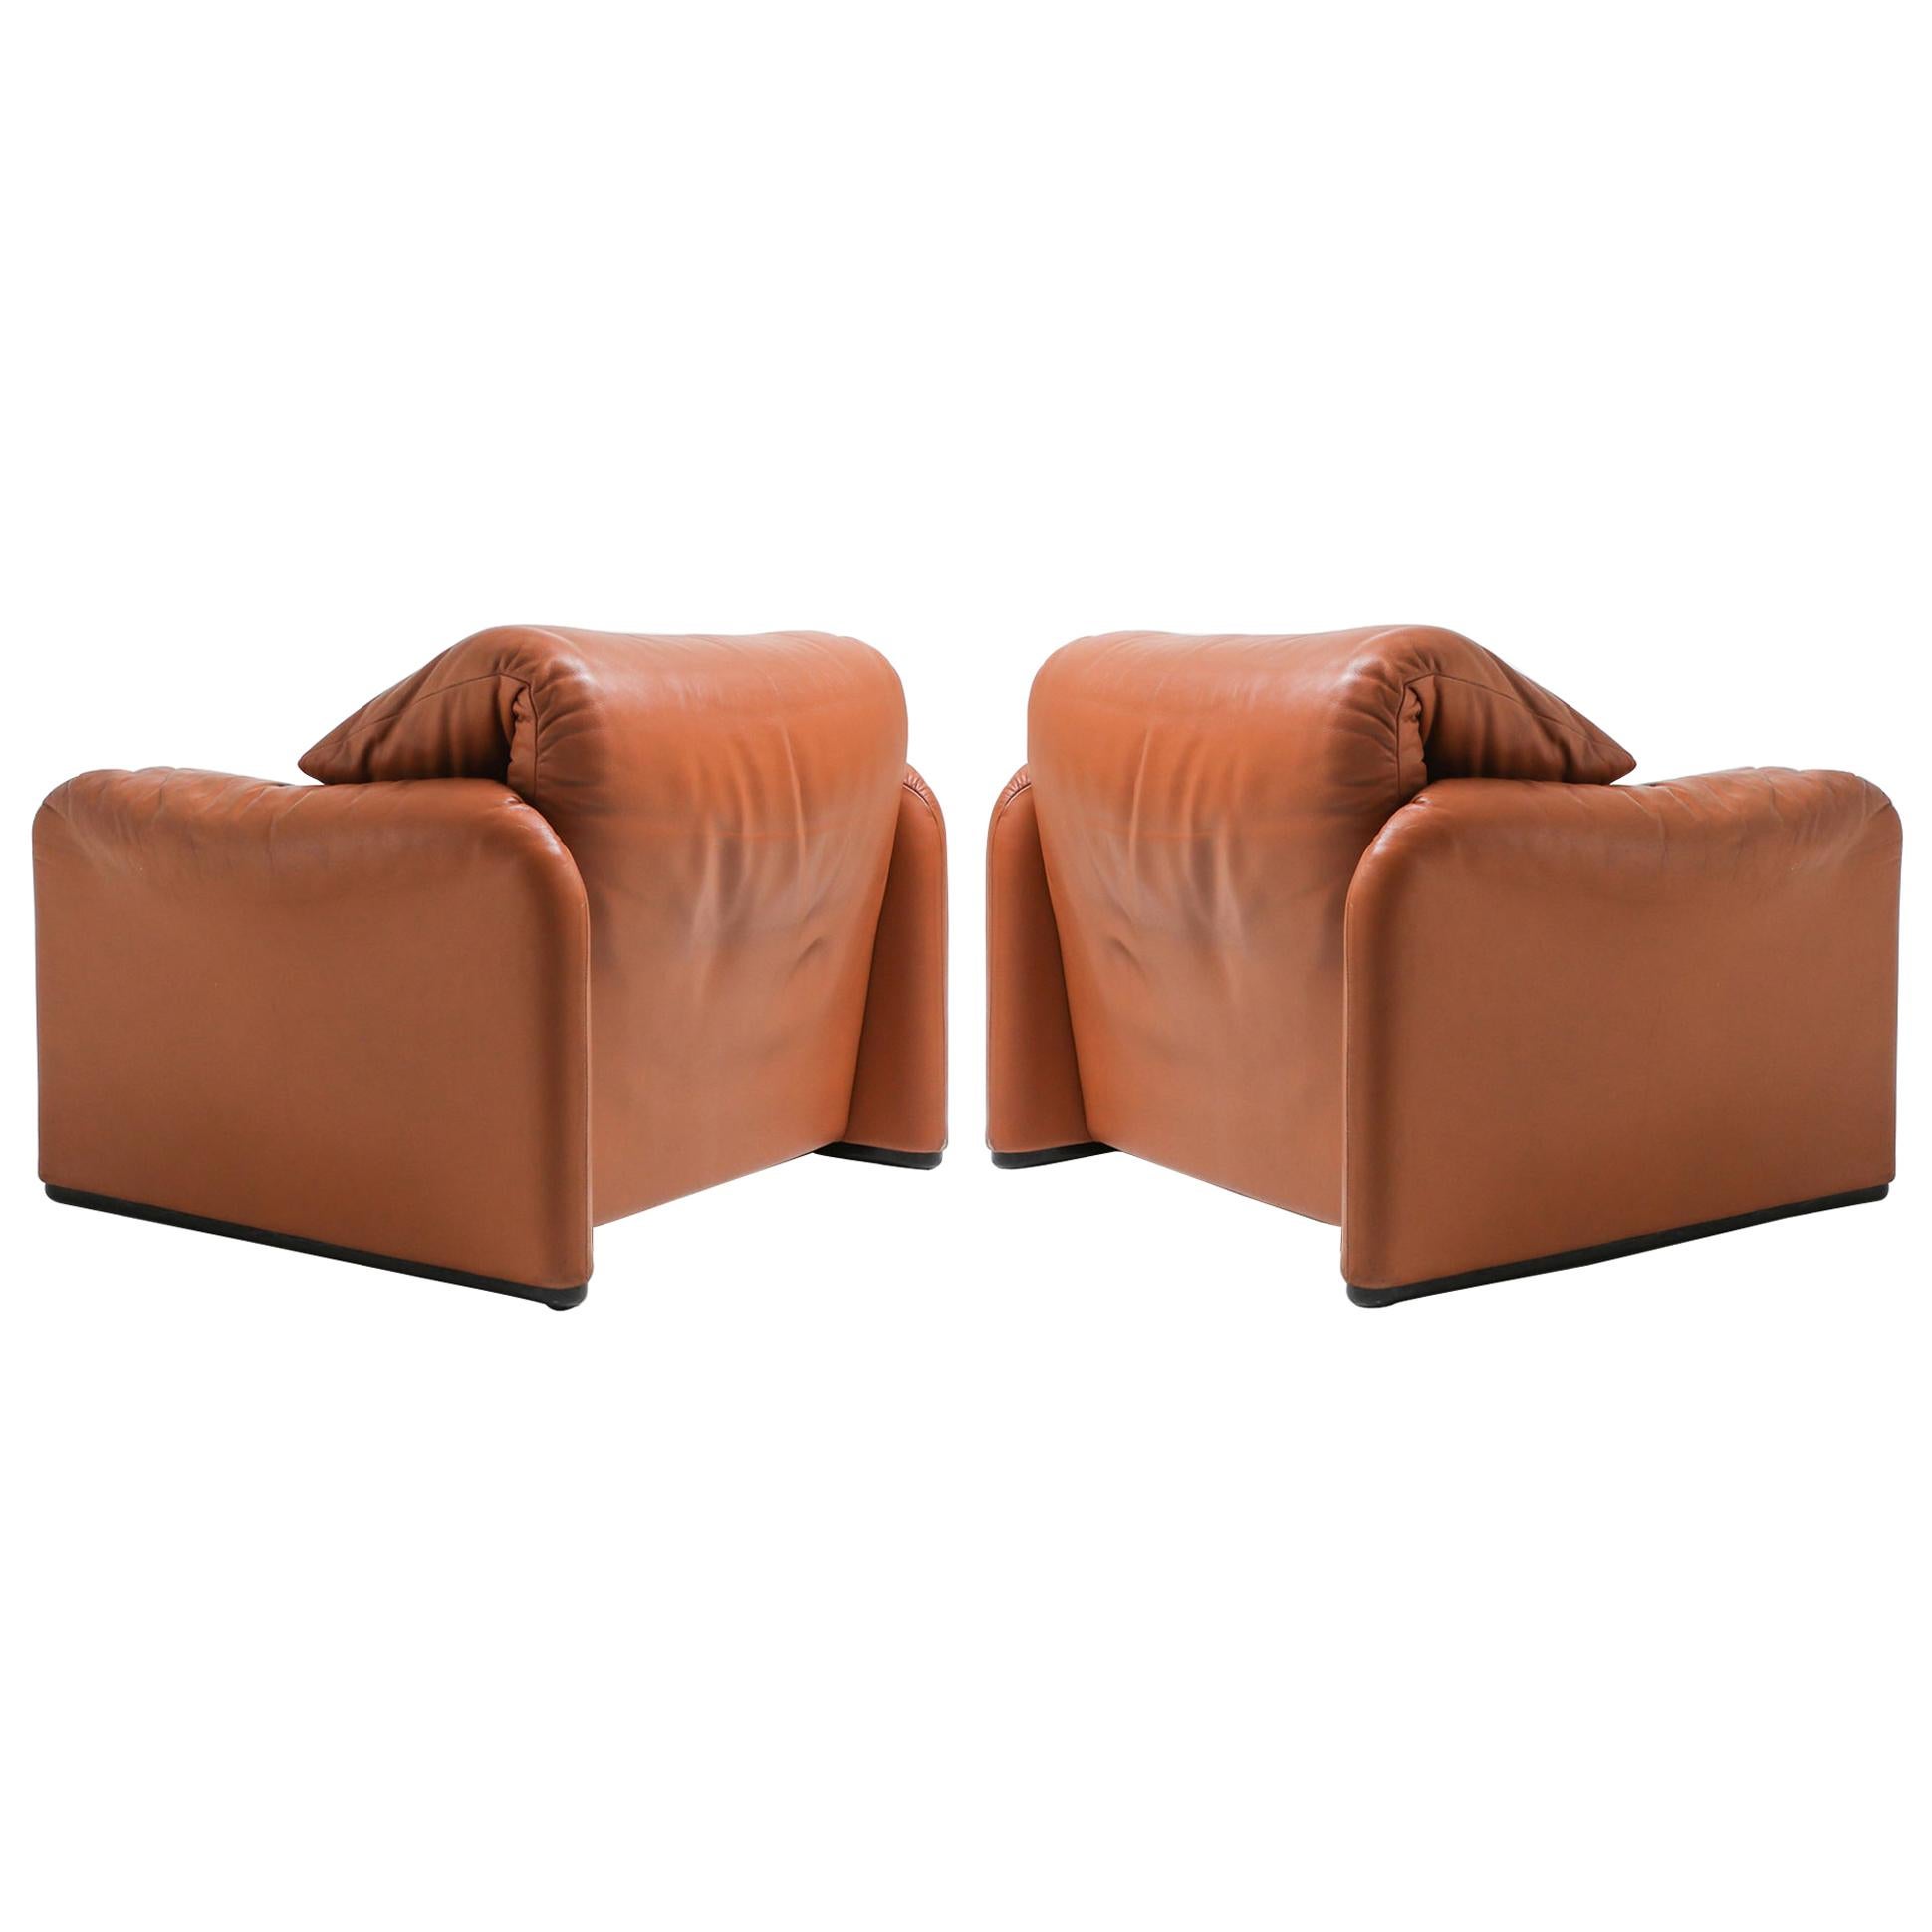 Maralunga Cognac Leather Club Chairs by Vico Magistretti for Cassina, 1974